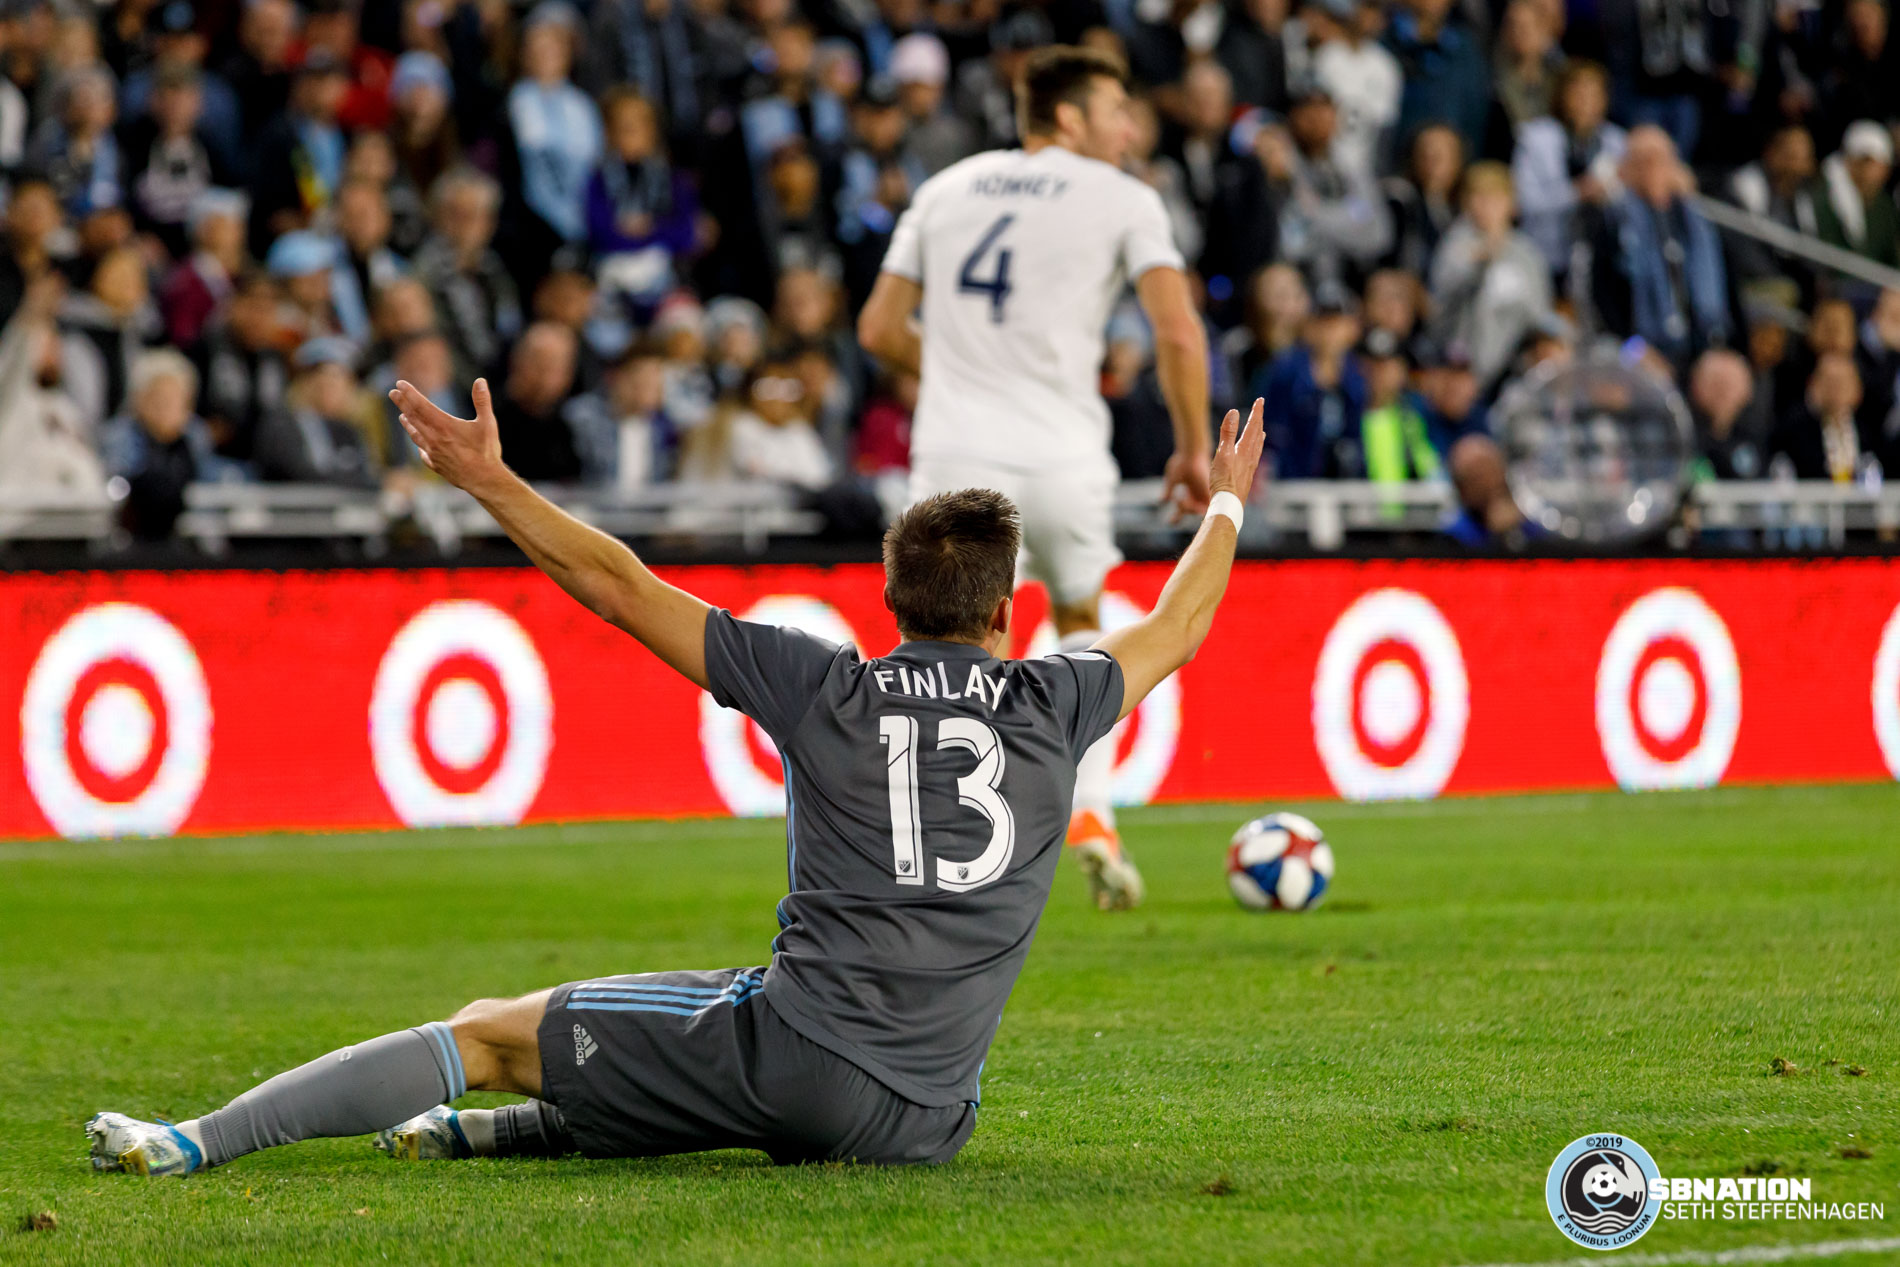 October 20, 2019 - Saint Paul, Minnesota, United States - Minnesota United midfielder Ethan Finlay (13) looks for a foul against him during the Minnesota United vs LA Galaxy 1st round playoff match at Allianz Field. 
